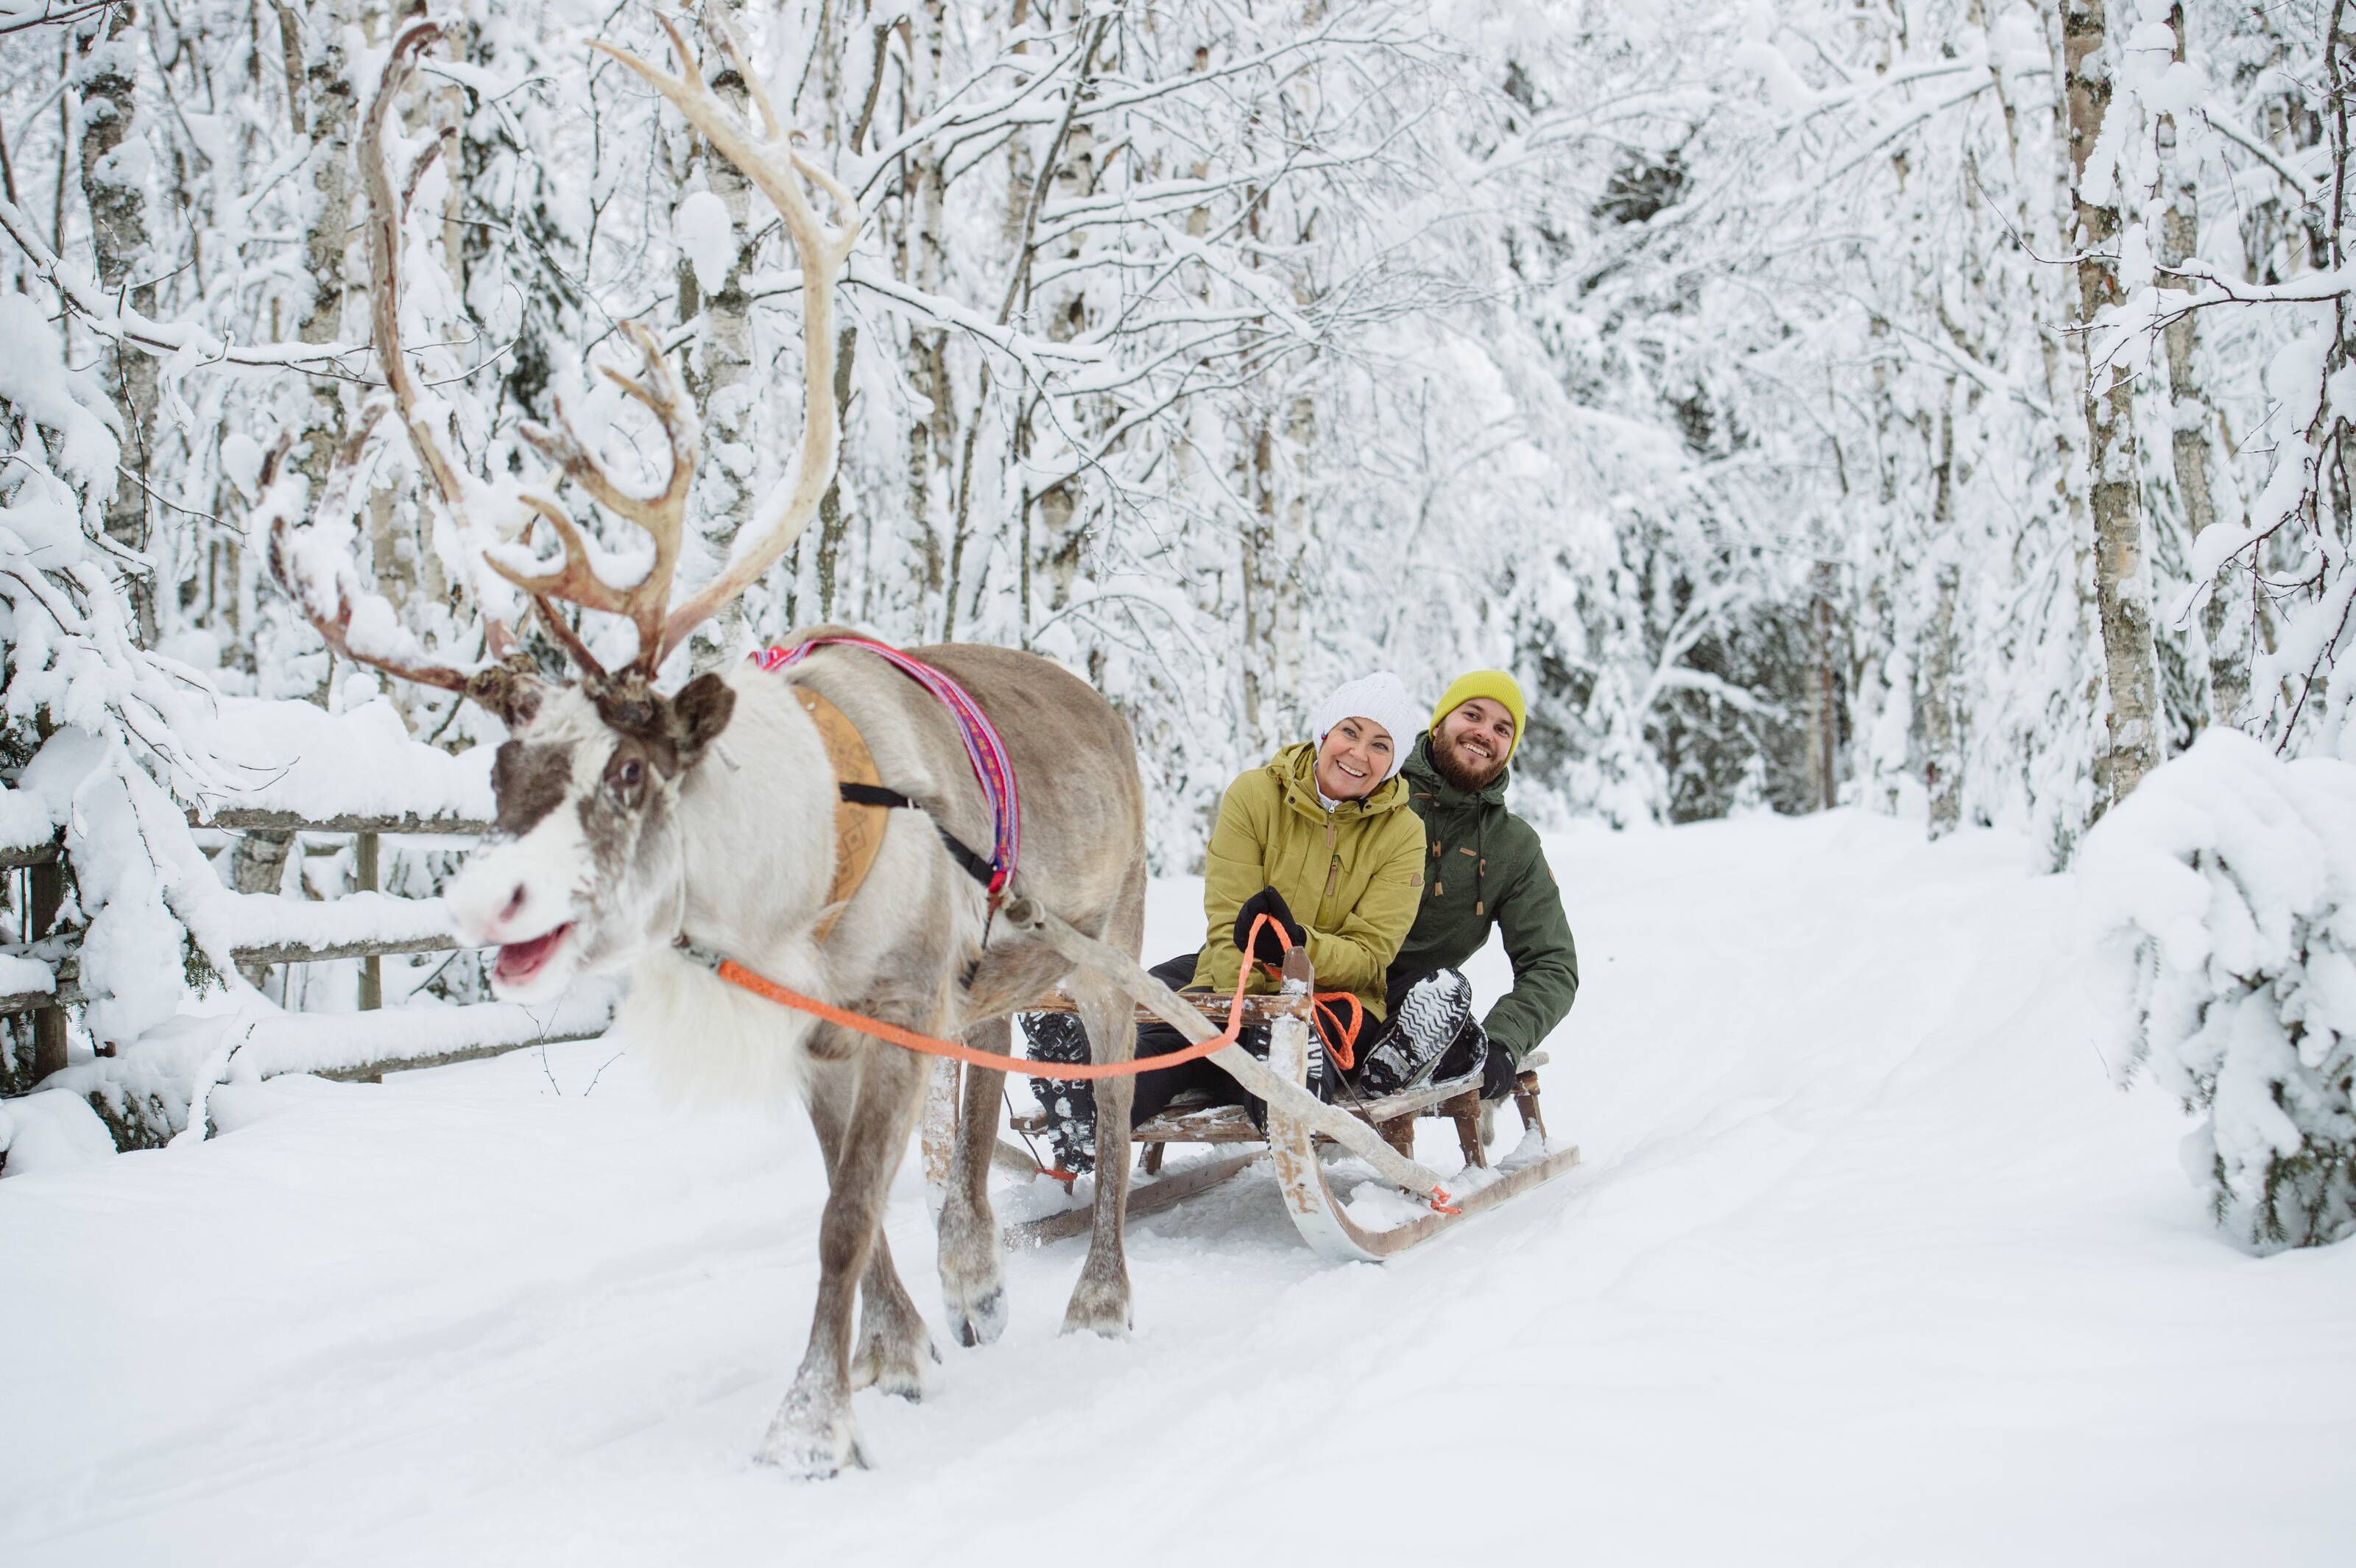 Two people riding a sleigh pulled by a reindeer